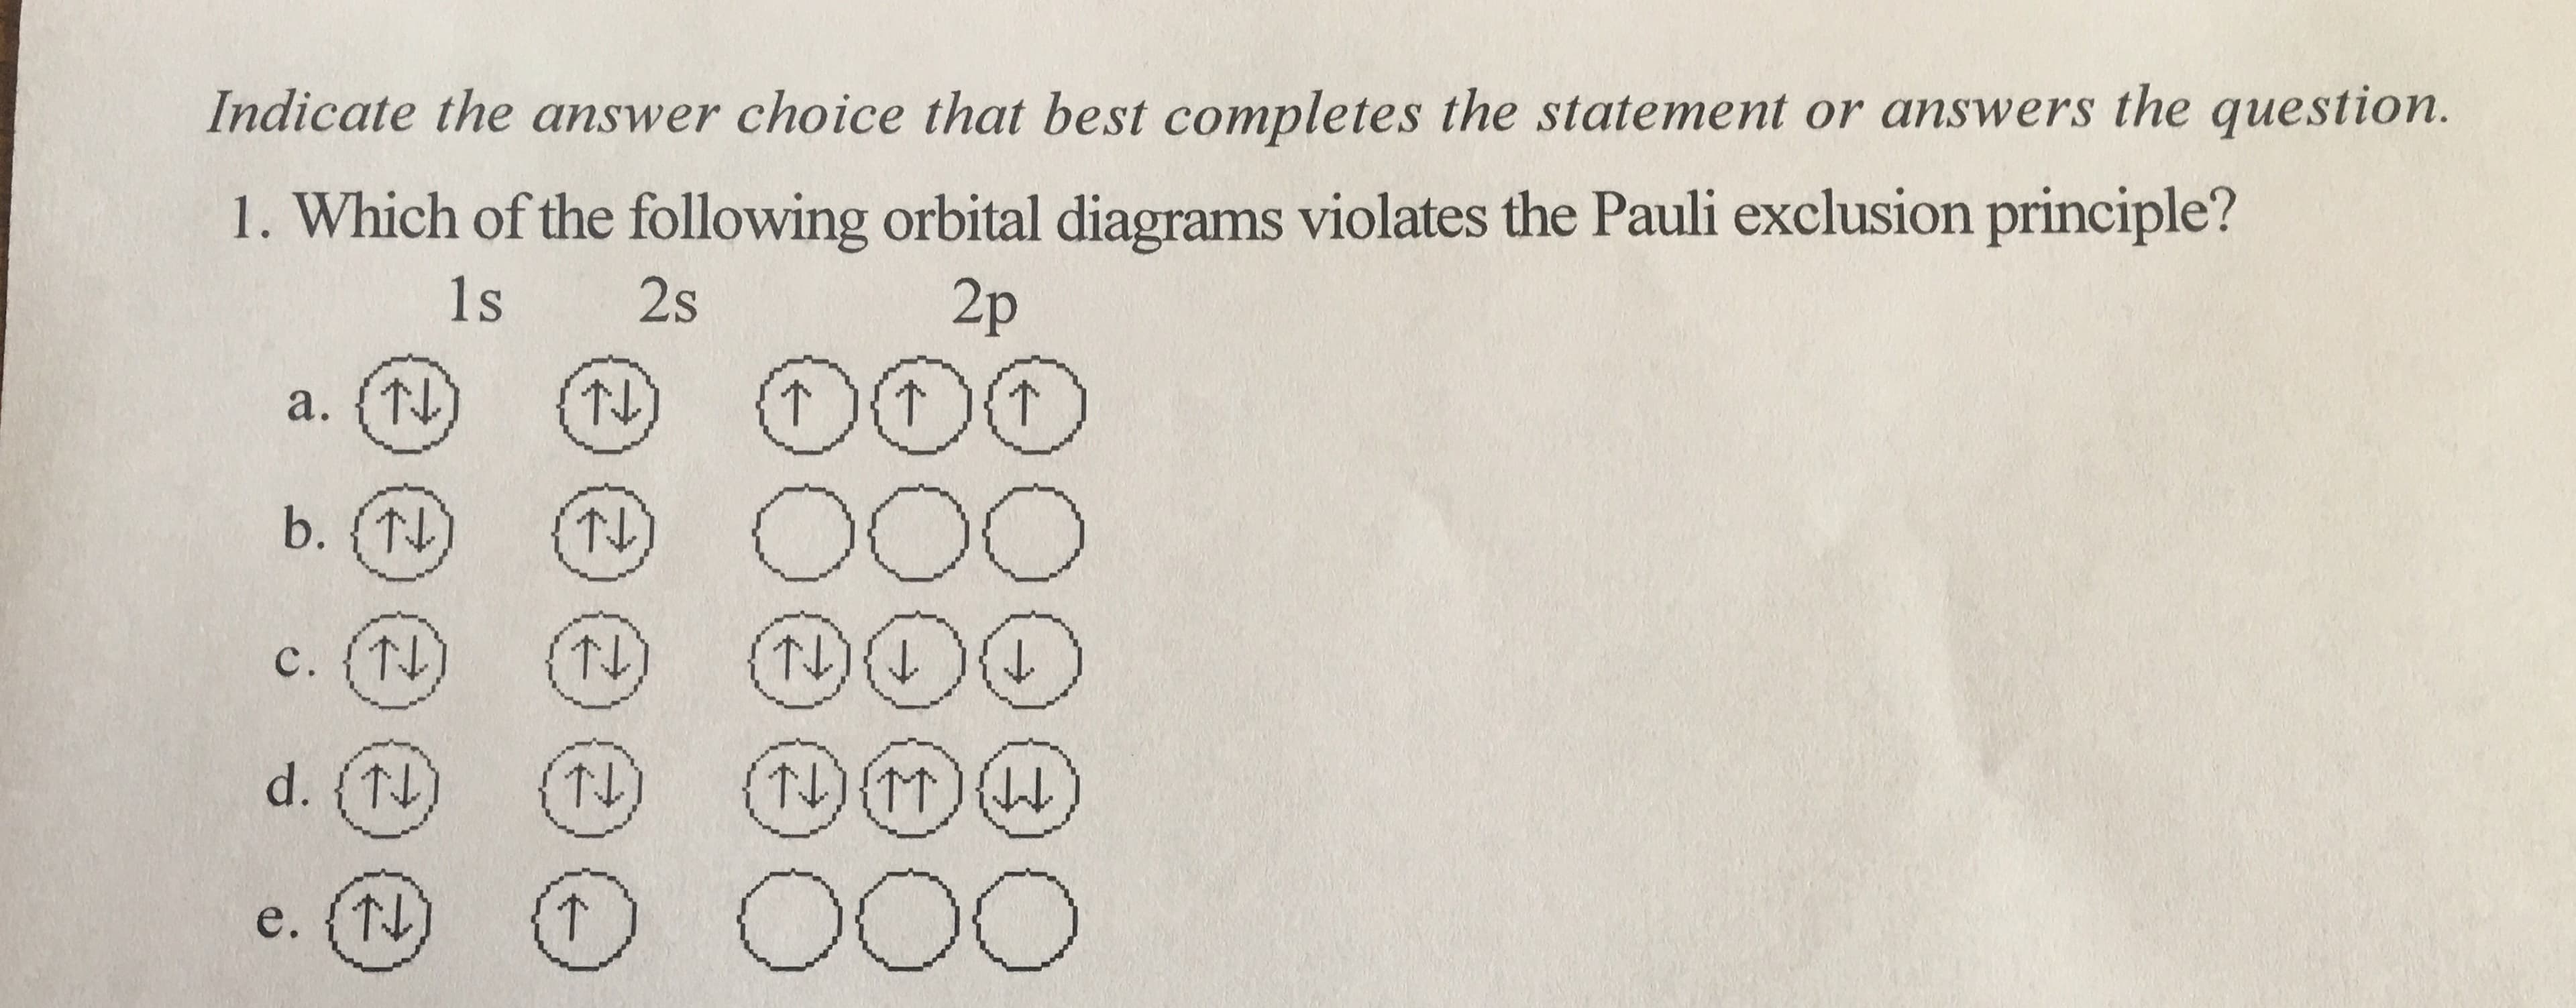 Indicate the answer choice that best completes the statement or answers the question.
1. Which of the following orbital diagrams violates the Pauli exclusion principle?
1s
2s
2p
T
a. T
O00
b. (T)
(T4)
C. {TL
11)
d. (T)
M(L(T
OO0
e. (T)
